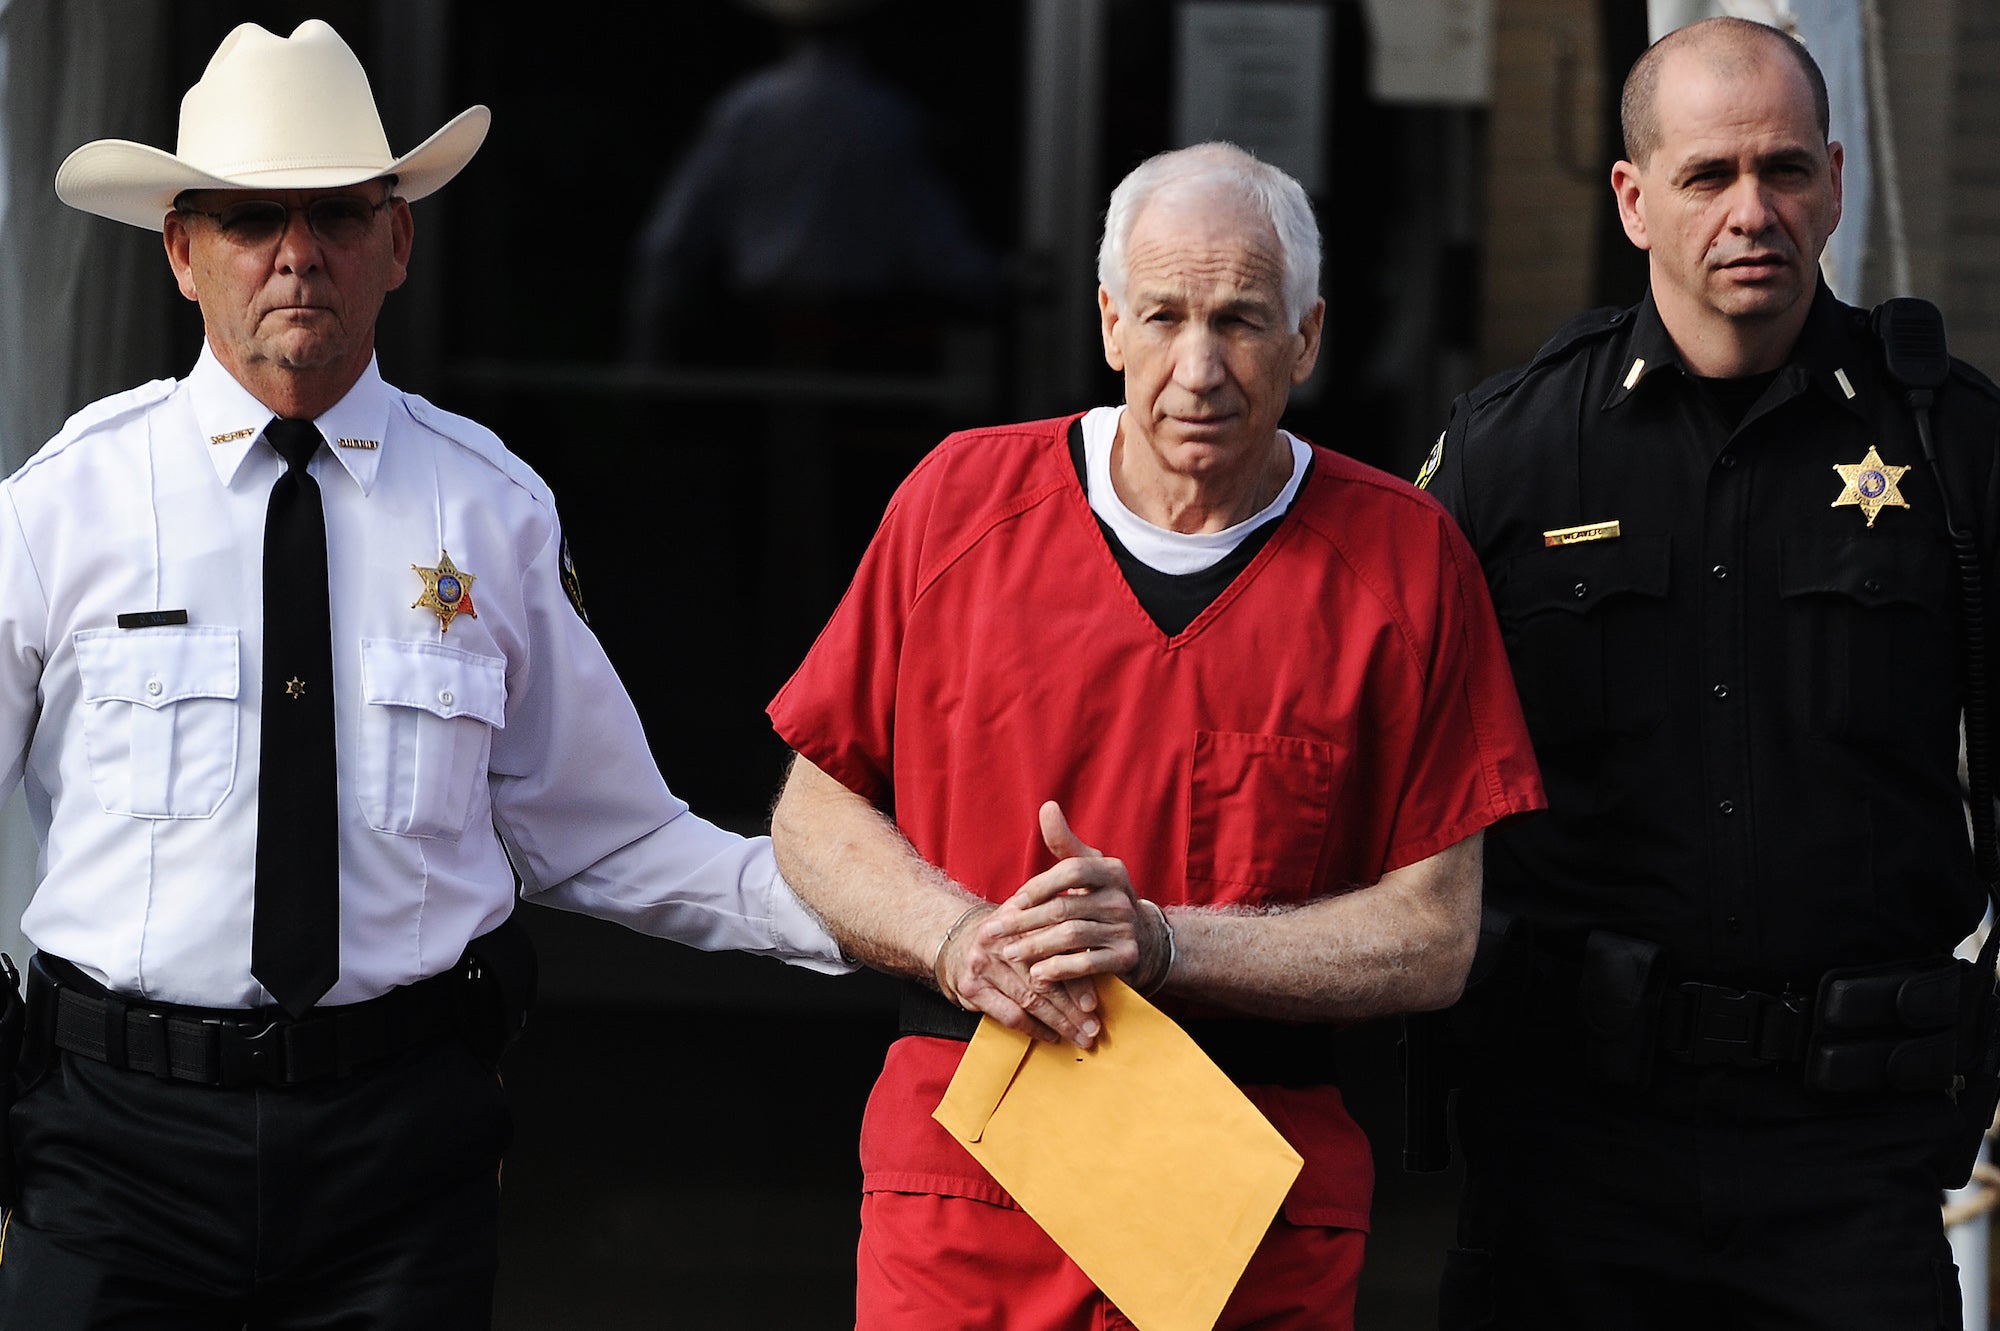 Jerry Sandusky leaves a Pennsylvania courthouse in in 2012.